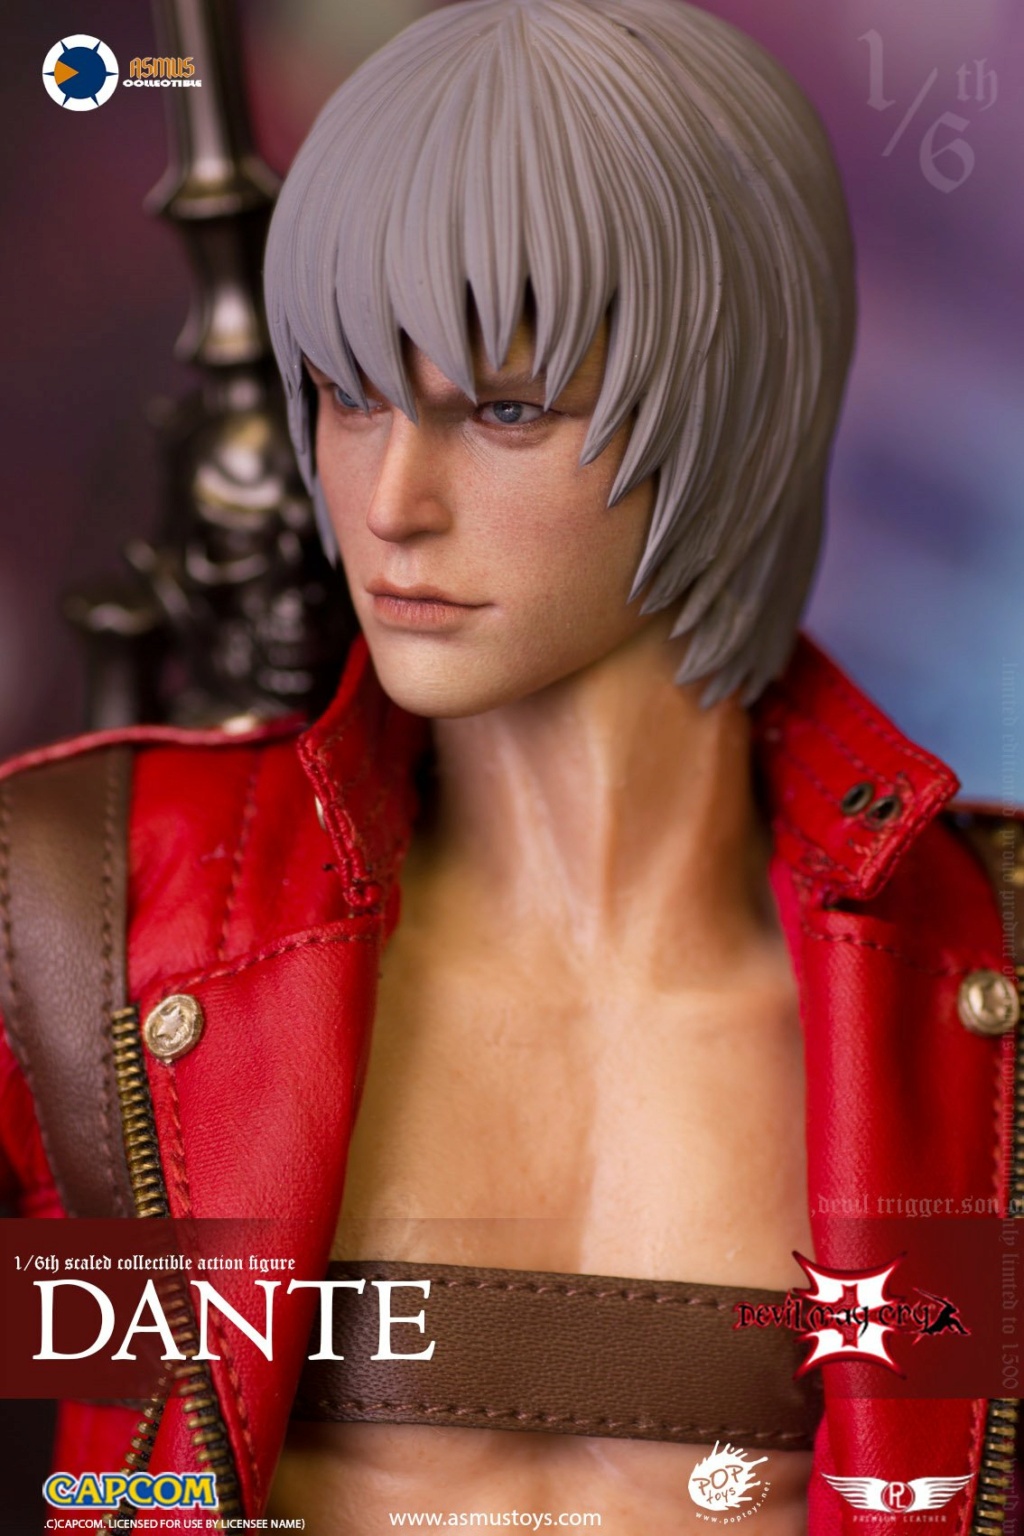 videogame - NEW PRODUCT: Asmus Toys: 1/6 Devil May Cry 3 - DANTE/Dante Standard Edition (DMC300V2) & Deluxe Edition 10462610